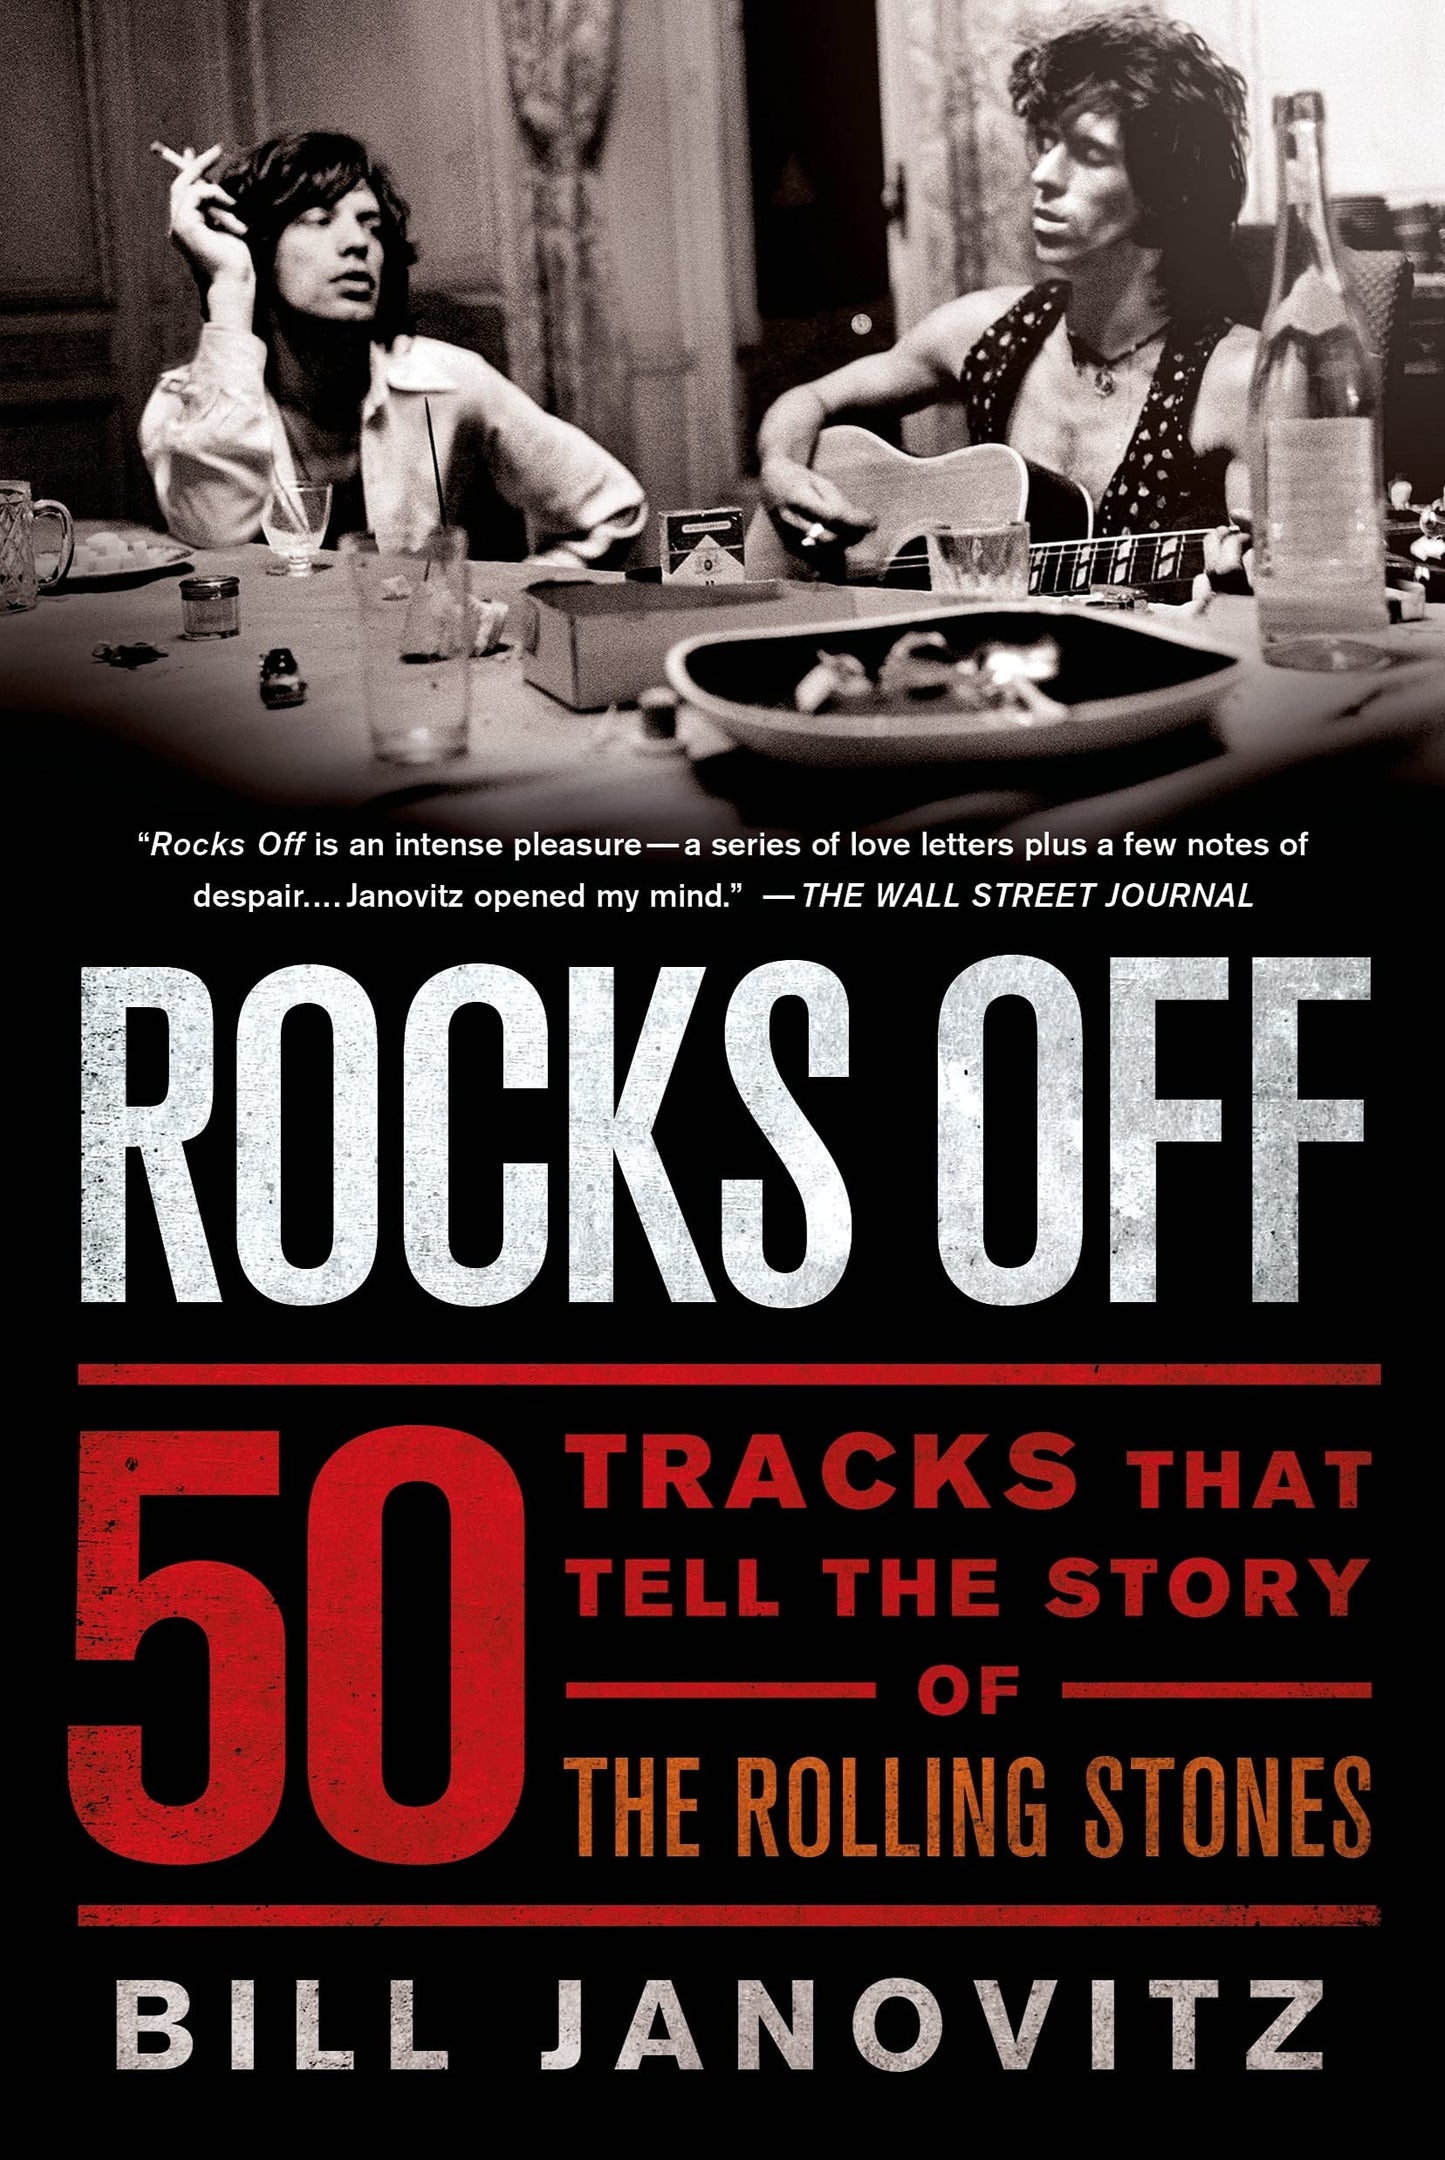 THE ROLLING STONES - ROCKS OFF: 50 TRACKS THAT TELL THE STORY OF THE ROLLING STONES  - PAPERBACK - BOOK